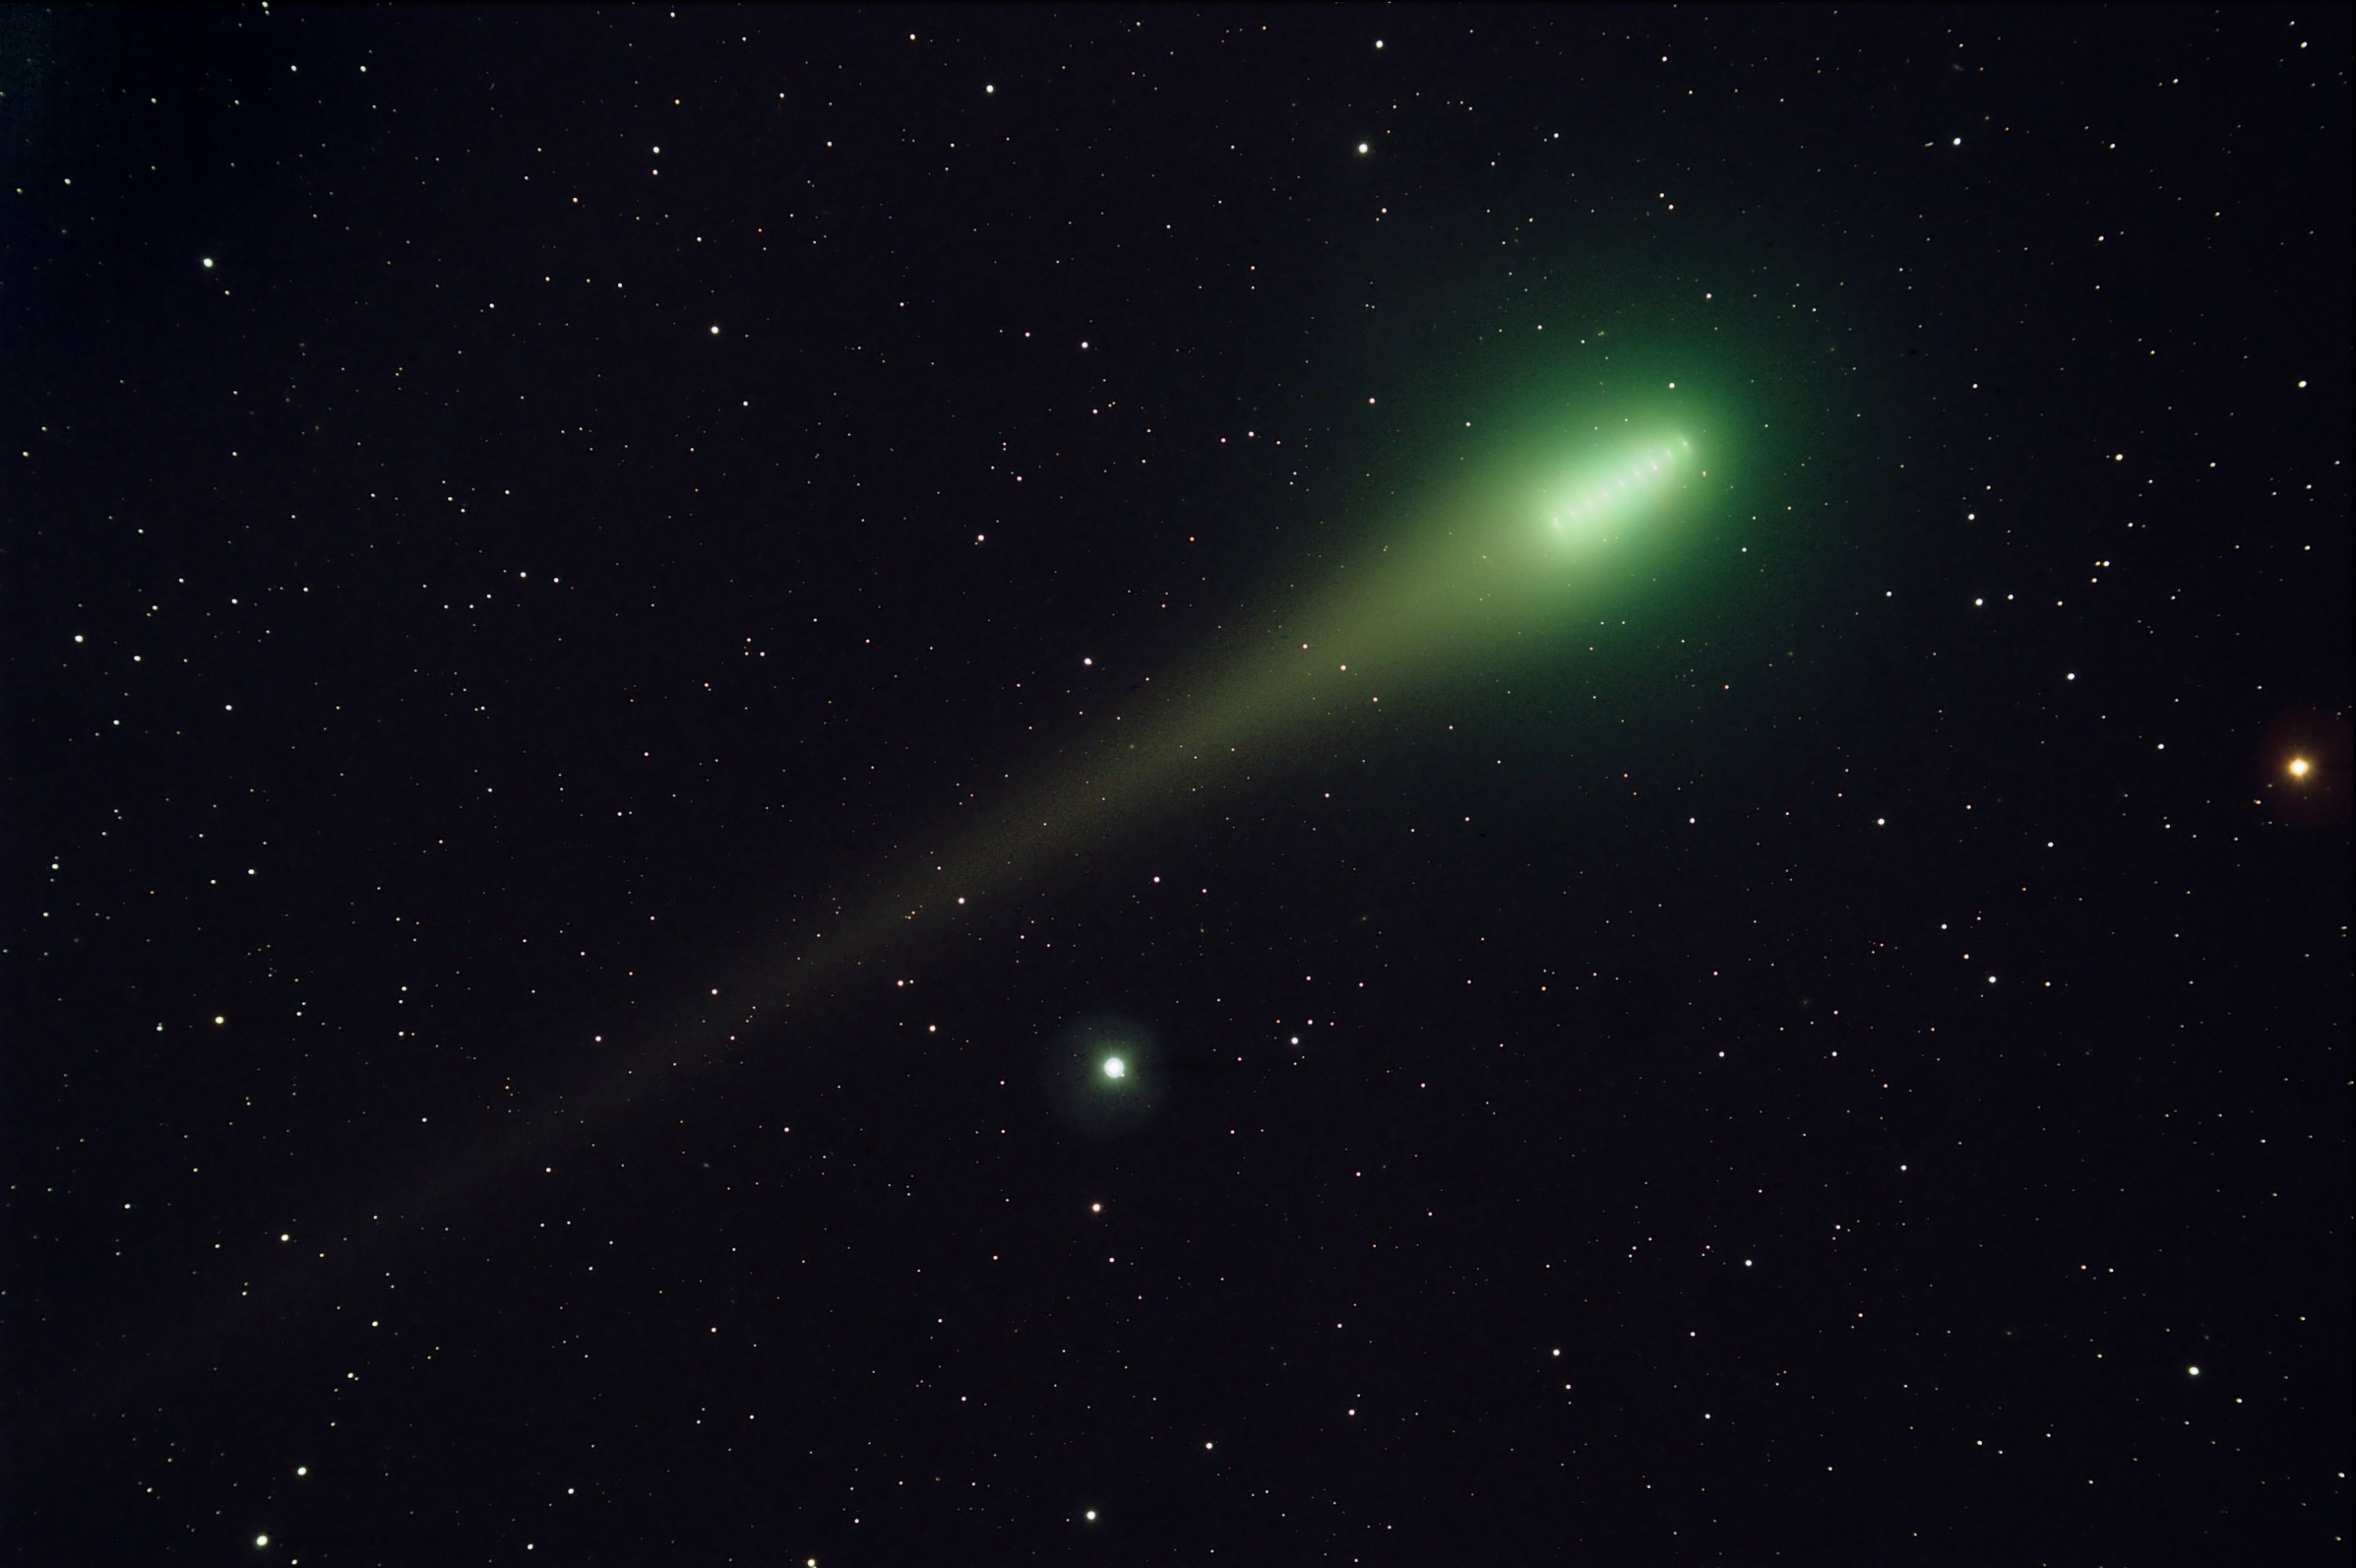 A Green Comet Is Getting Close to Earth. Here’s How You Can See It.